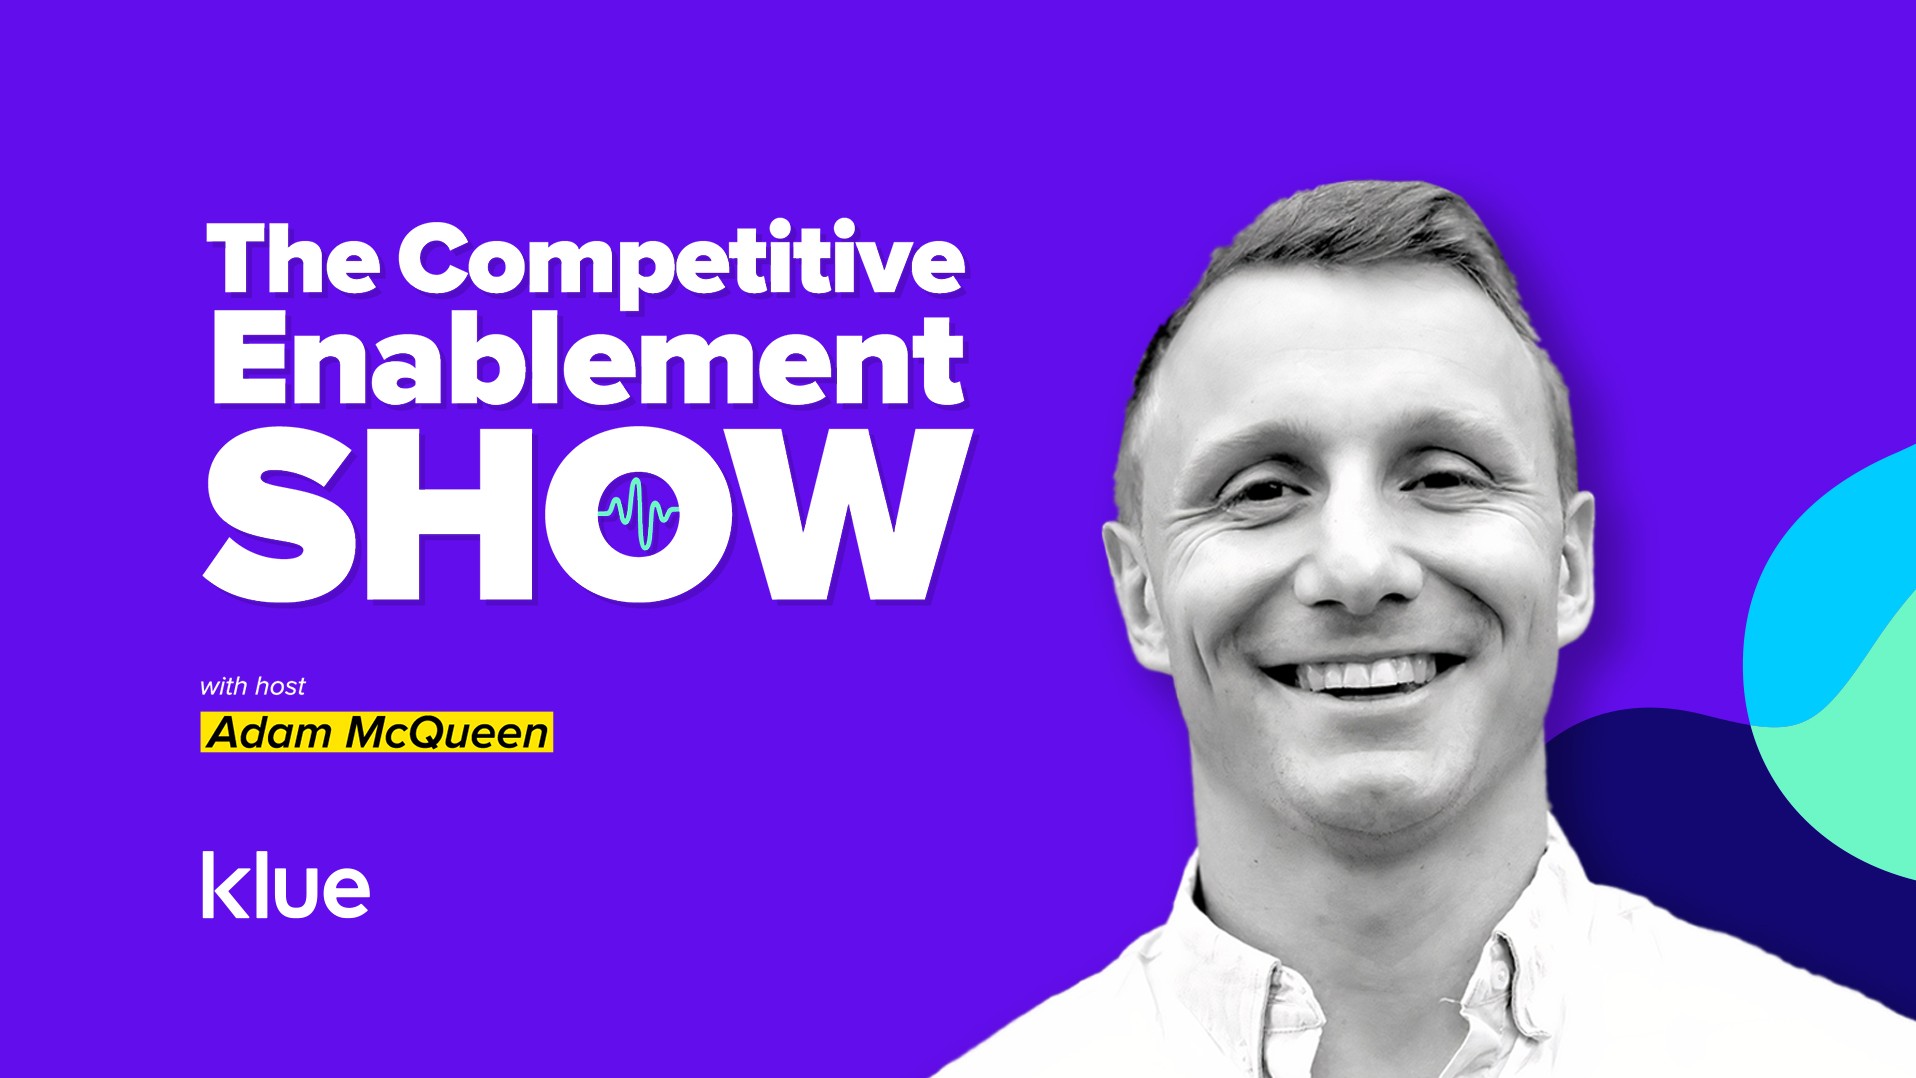 The Competitive Enablement Show